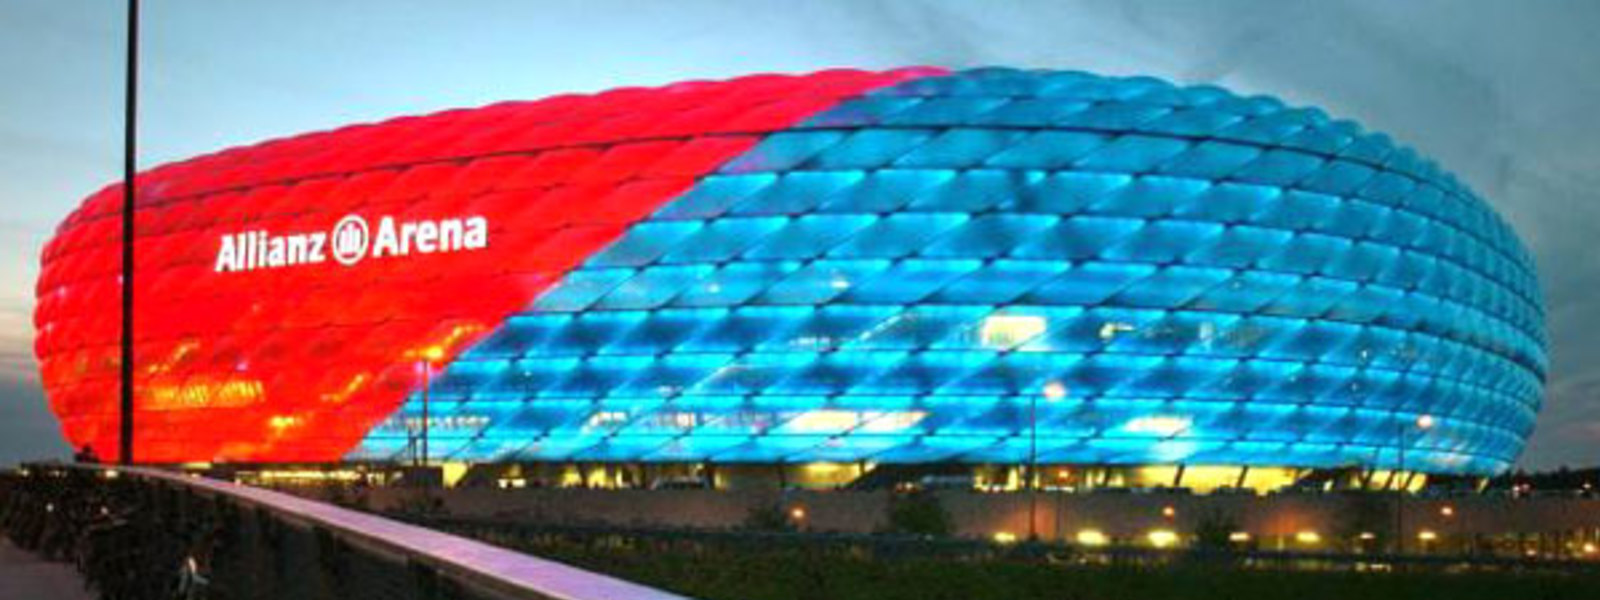 Very big allianz arena in germany